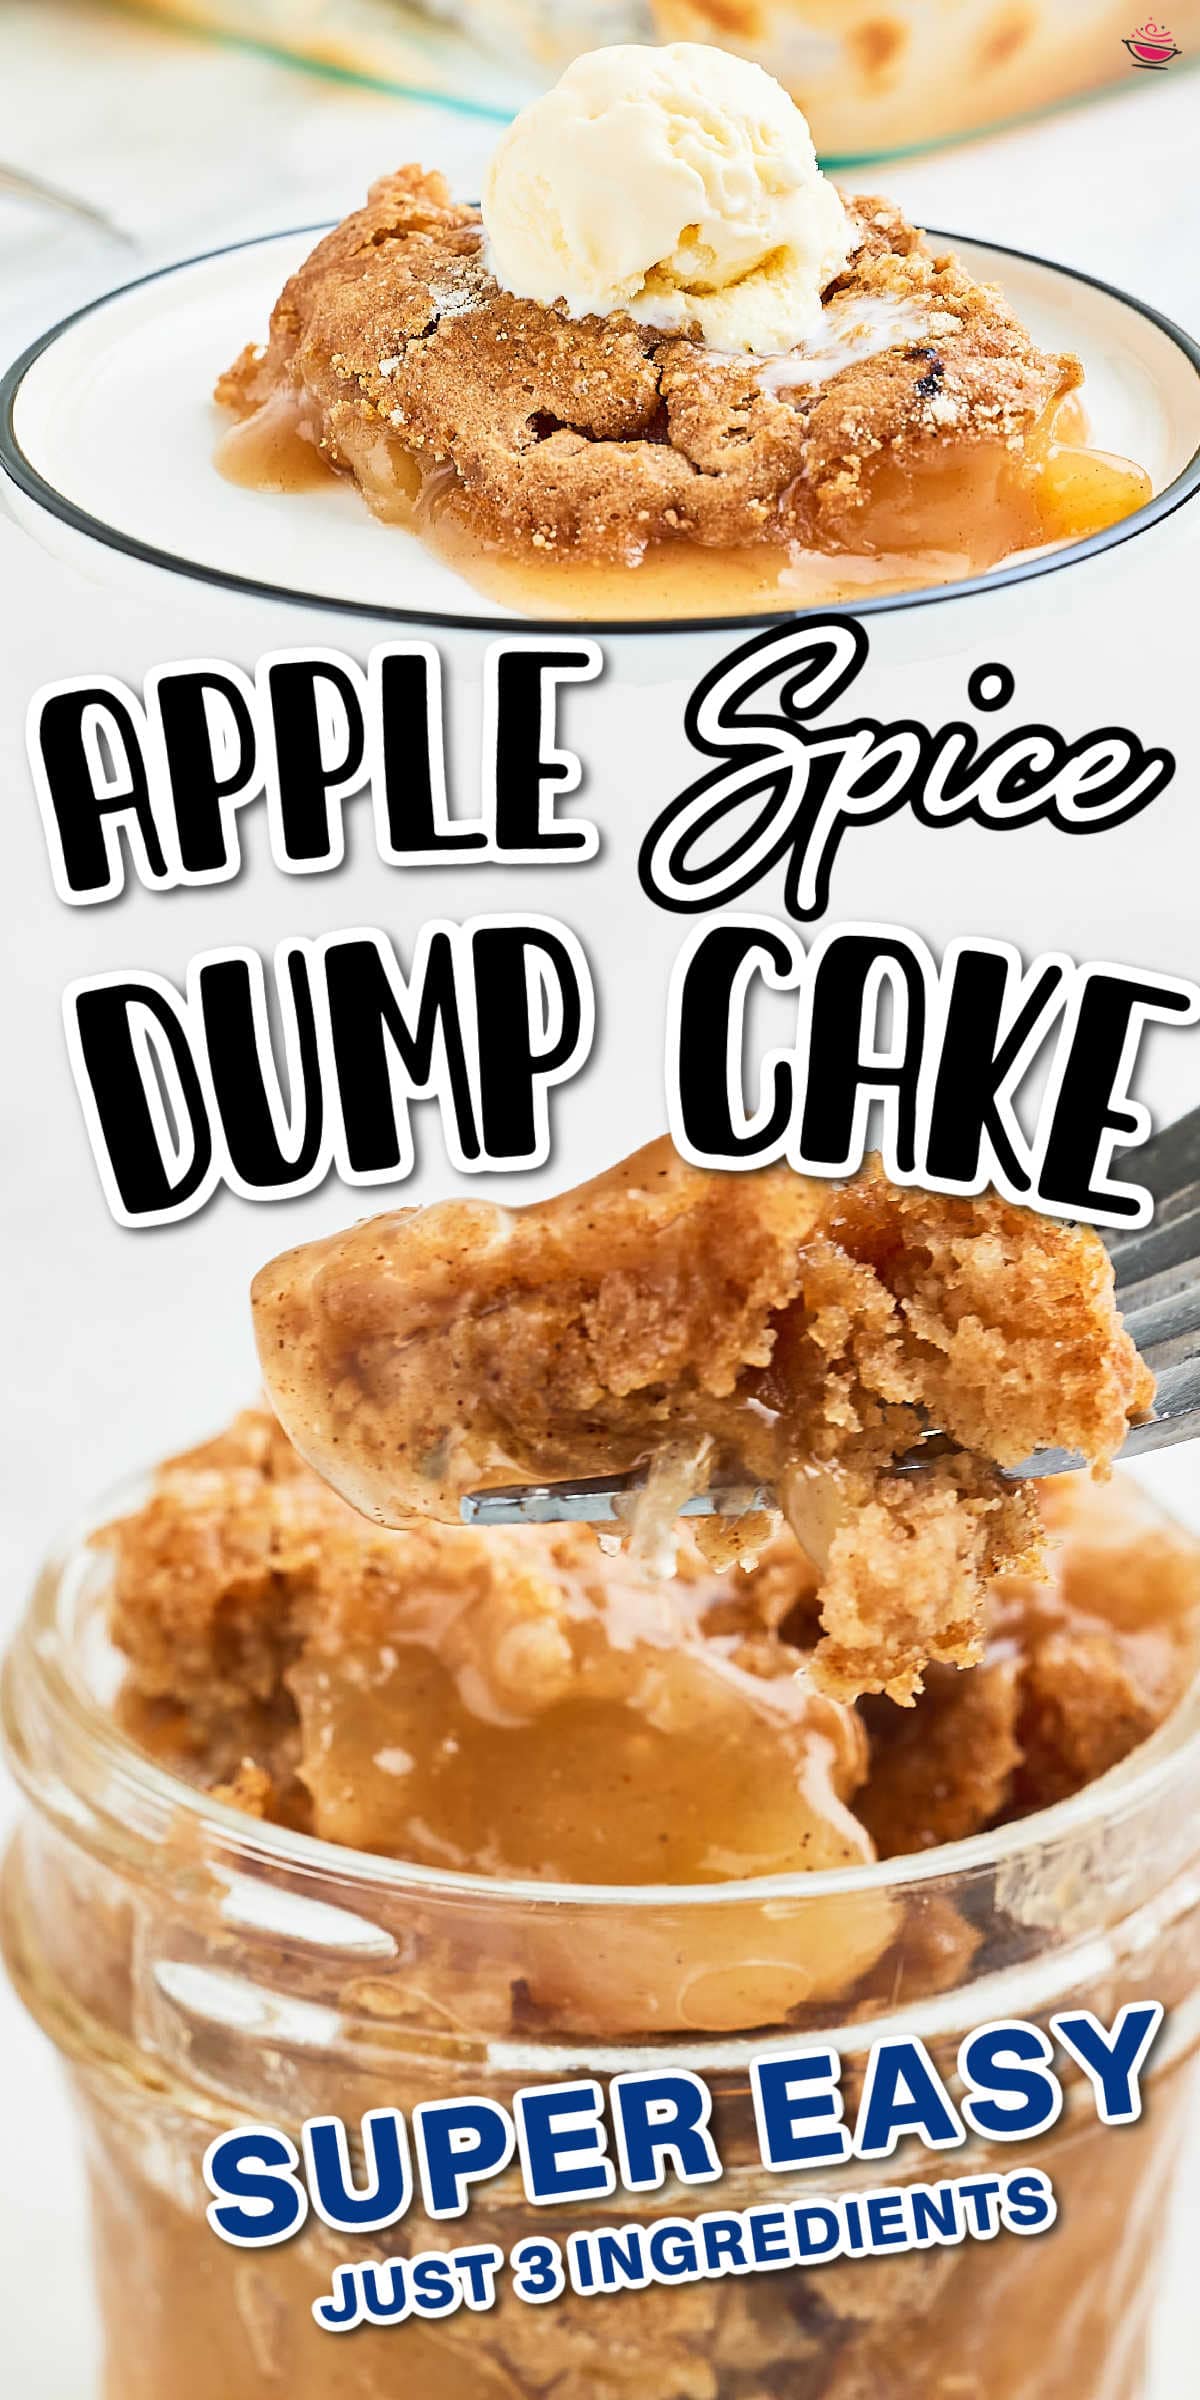 Our Apple Spice Dump Cake is super easy to make with just 3 ingredients! Perfect for a quick dessert. #cheerfulcook #AppleSpiceDumpCake #EasyDesserts #FallRecipes #dumpcake via @cheerfulcook